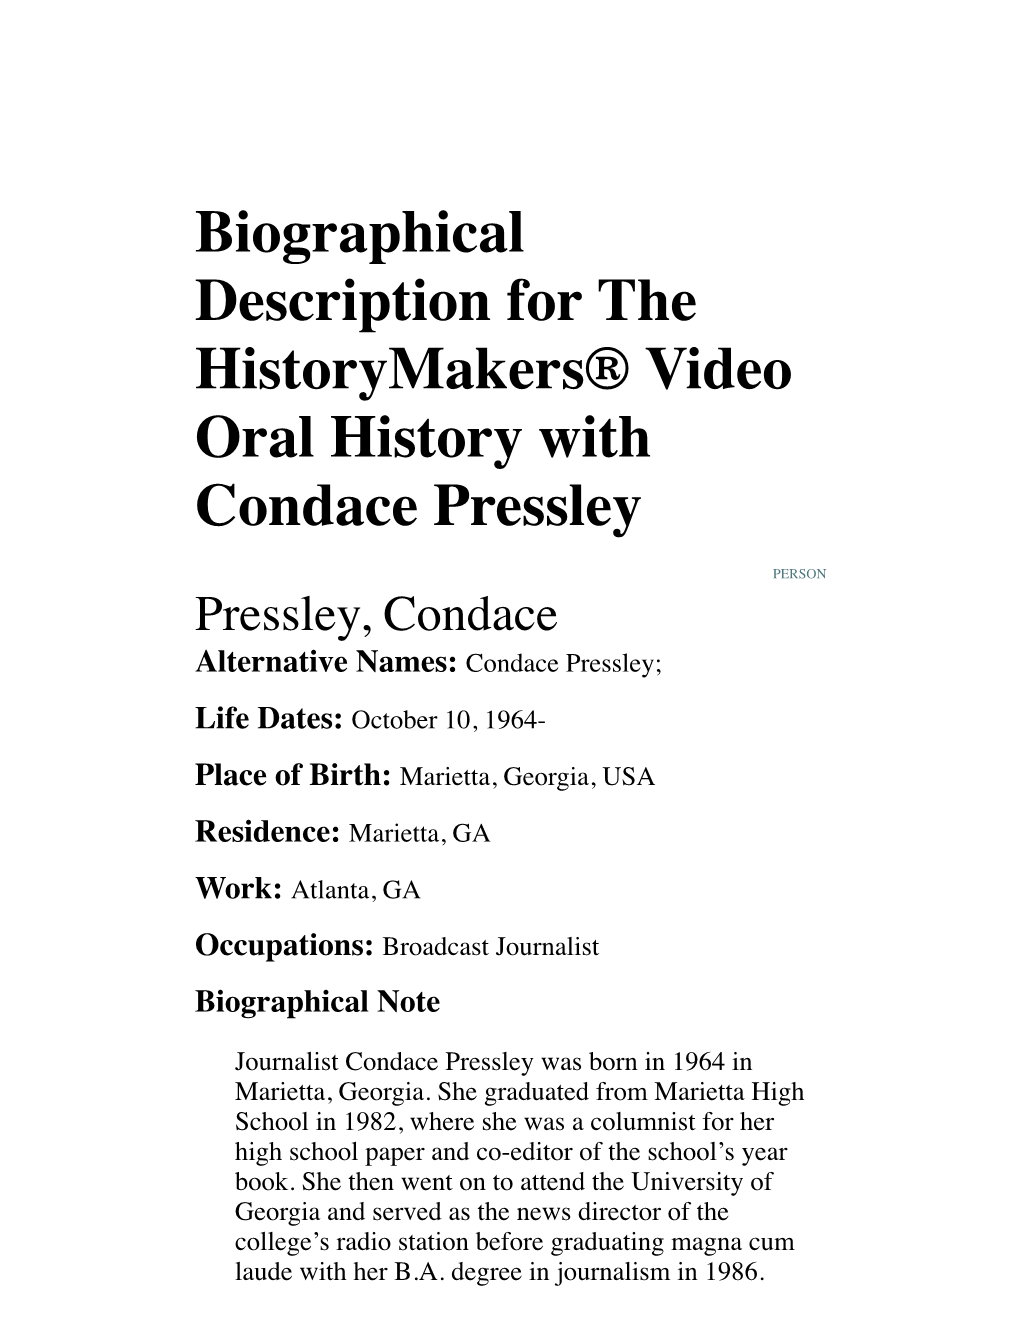 Biographical Description for the Historymakers® Video Oral History with Condace Pressley